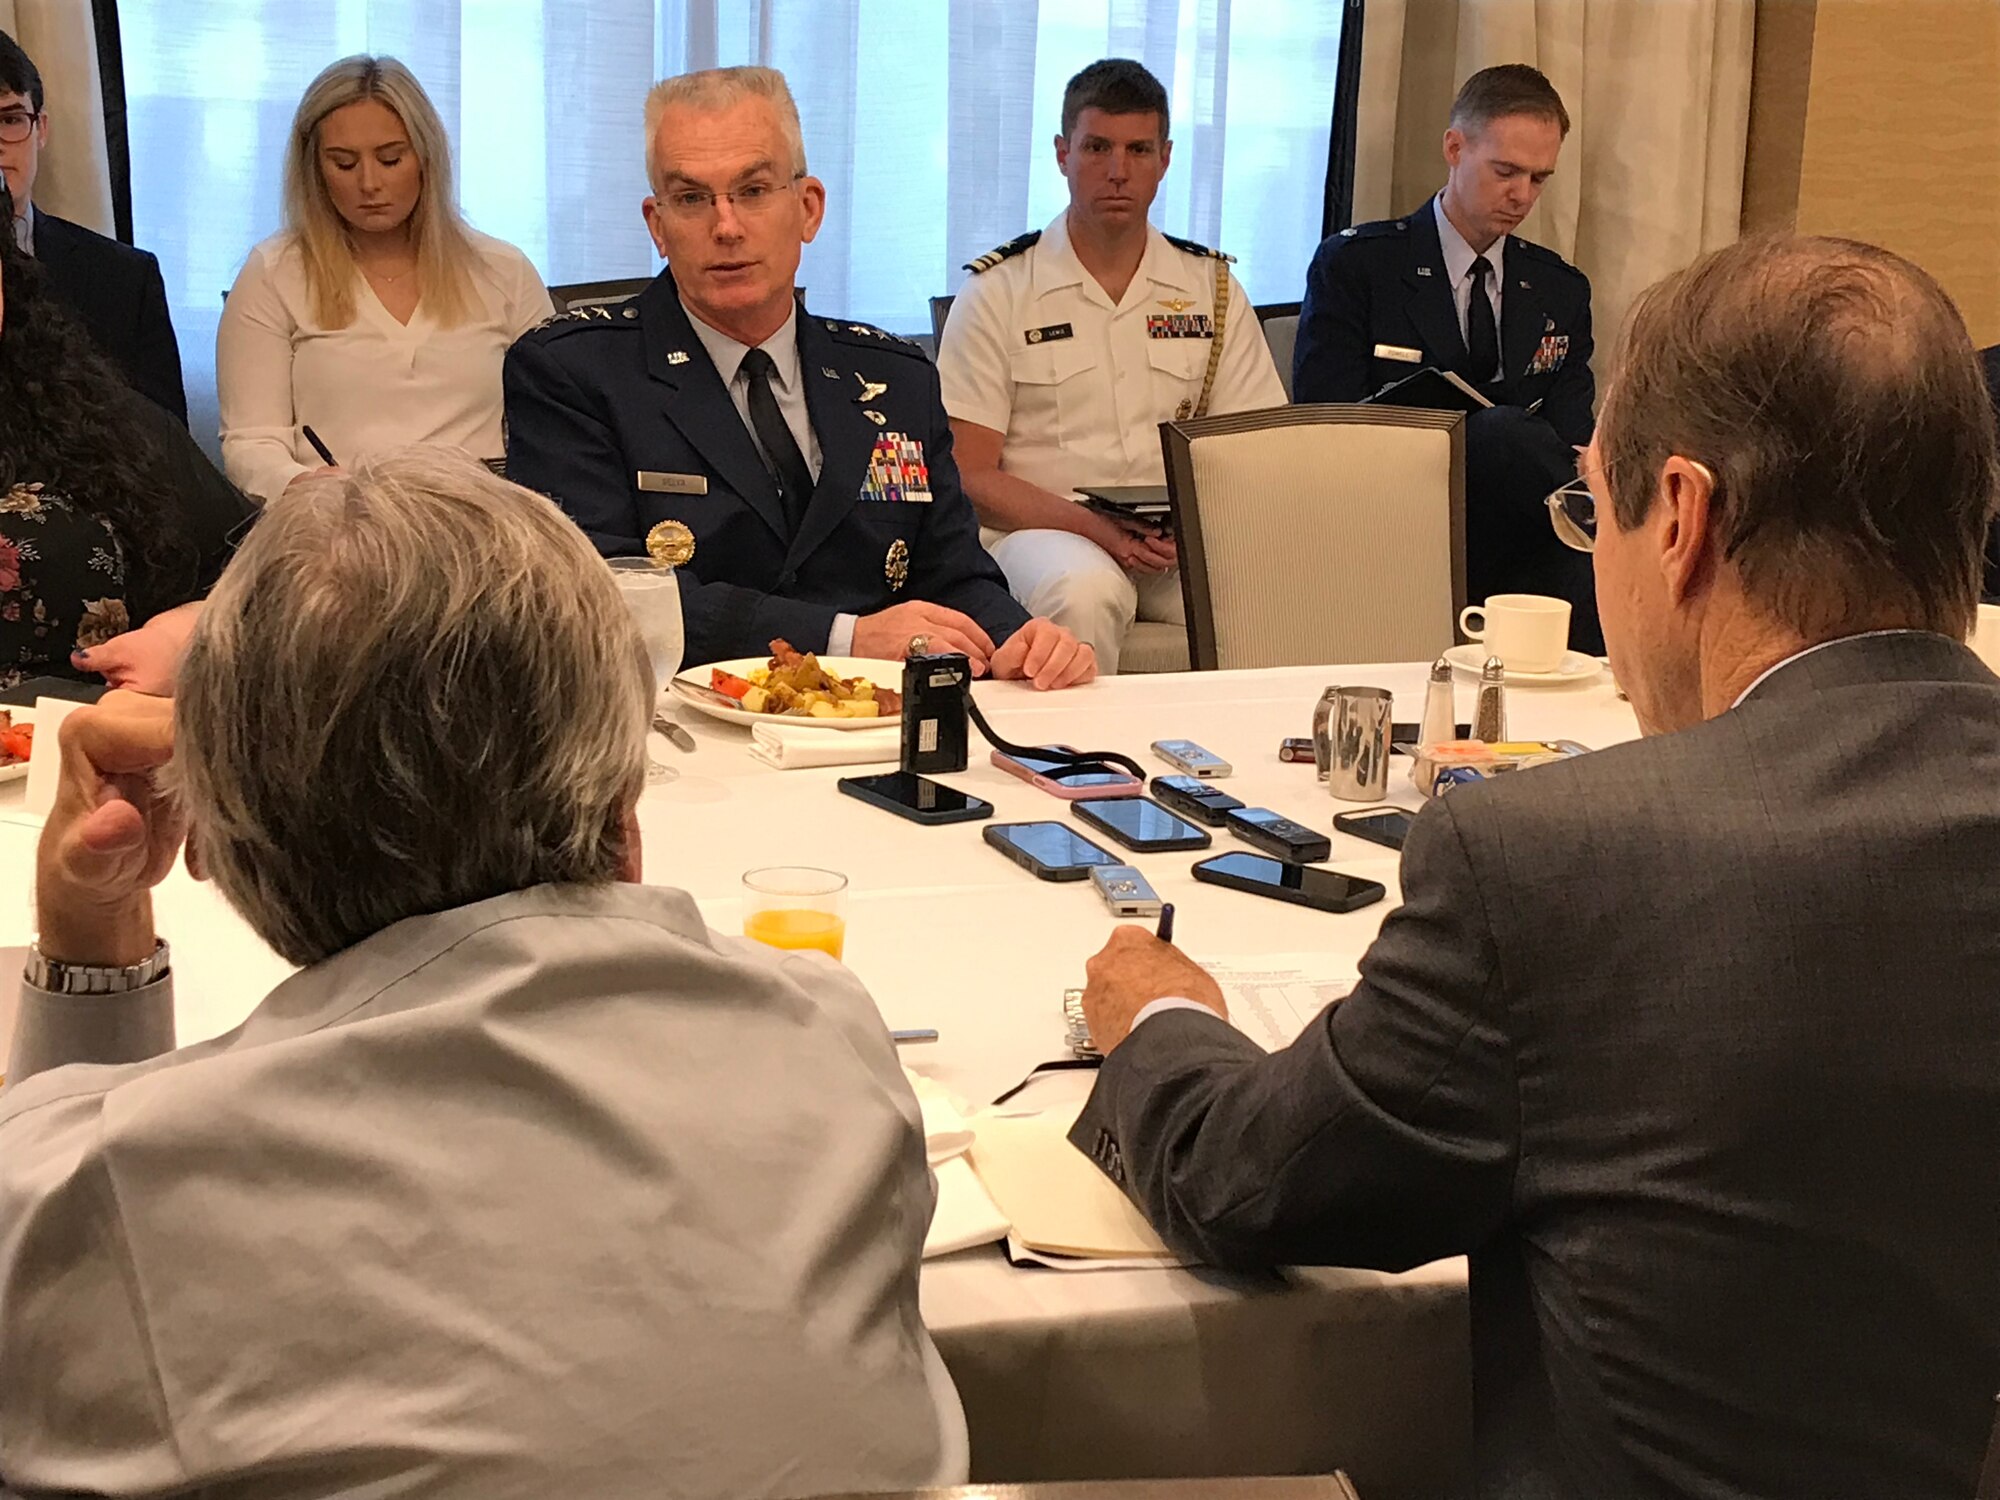 Air Force Gen. Paul J. Selva, the vice chairman of the Joint Chiefs of Staff, details Iranian involvement in oil tanker attacks during remarks at the Defense Writers Group in Washington, June 18, 2019.